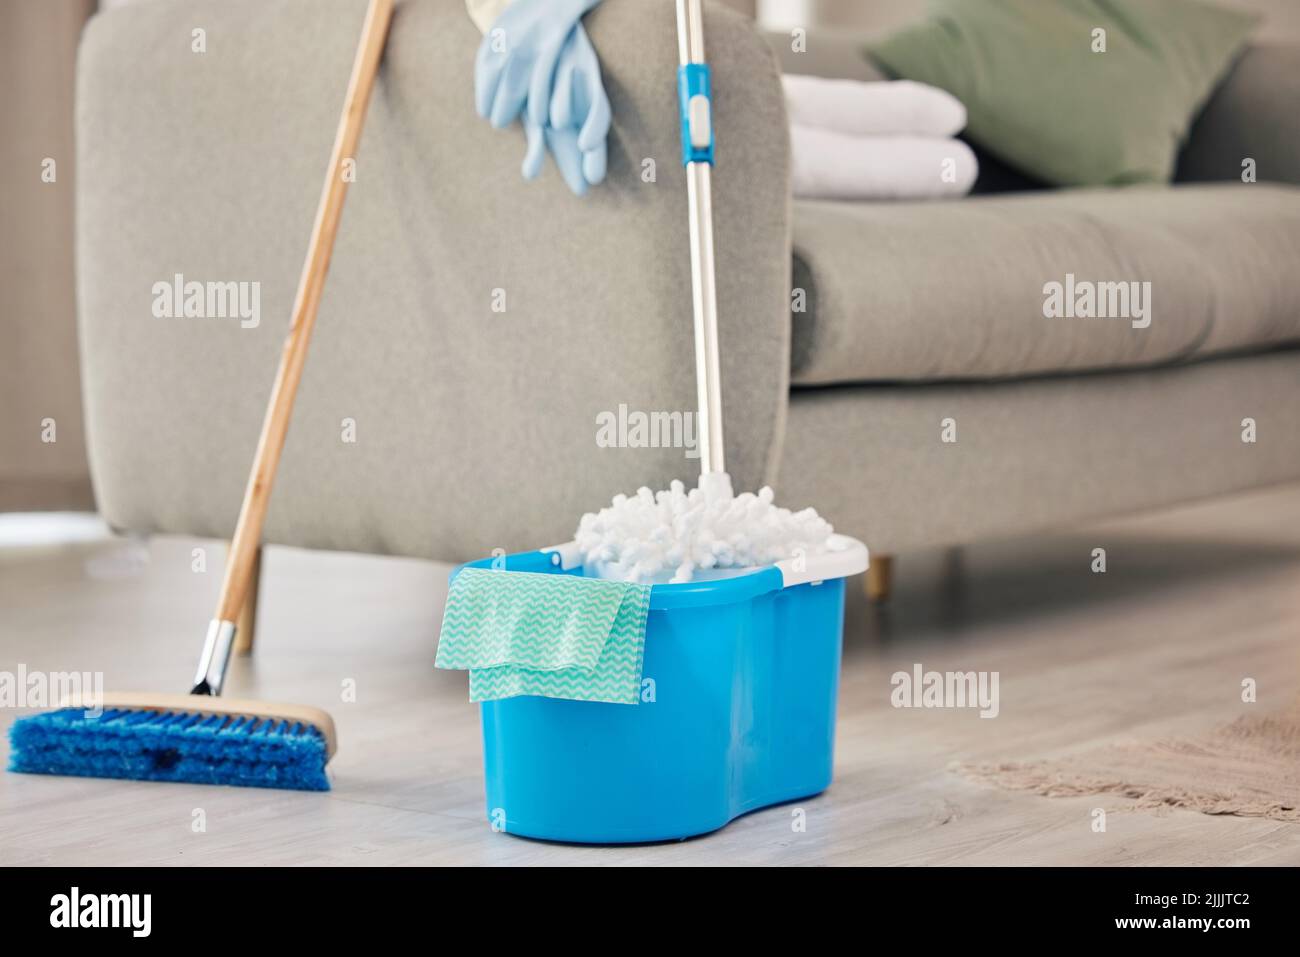 https://c8.alamy.com/comp/2JJJTC2/no-room-will-be-left-uncleaned-a-bucket-with-a-mop-and-broom-2JJJTC2.jpg